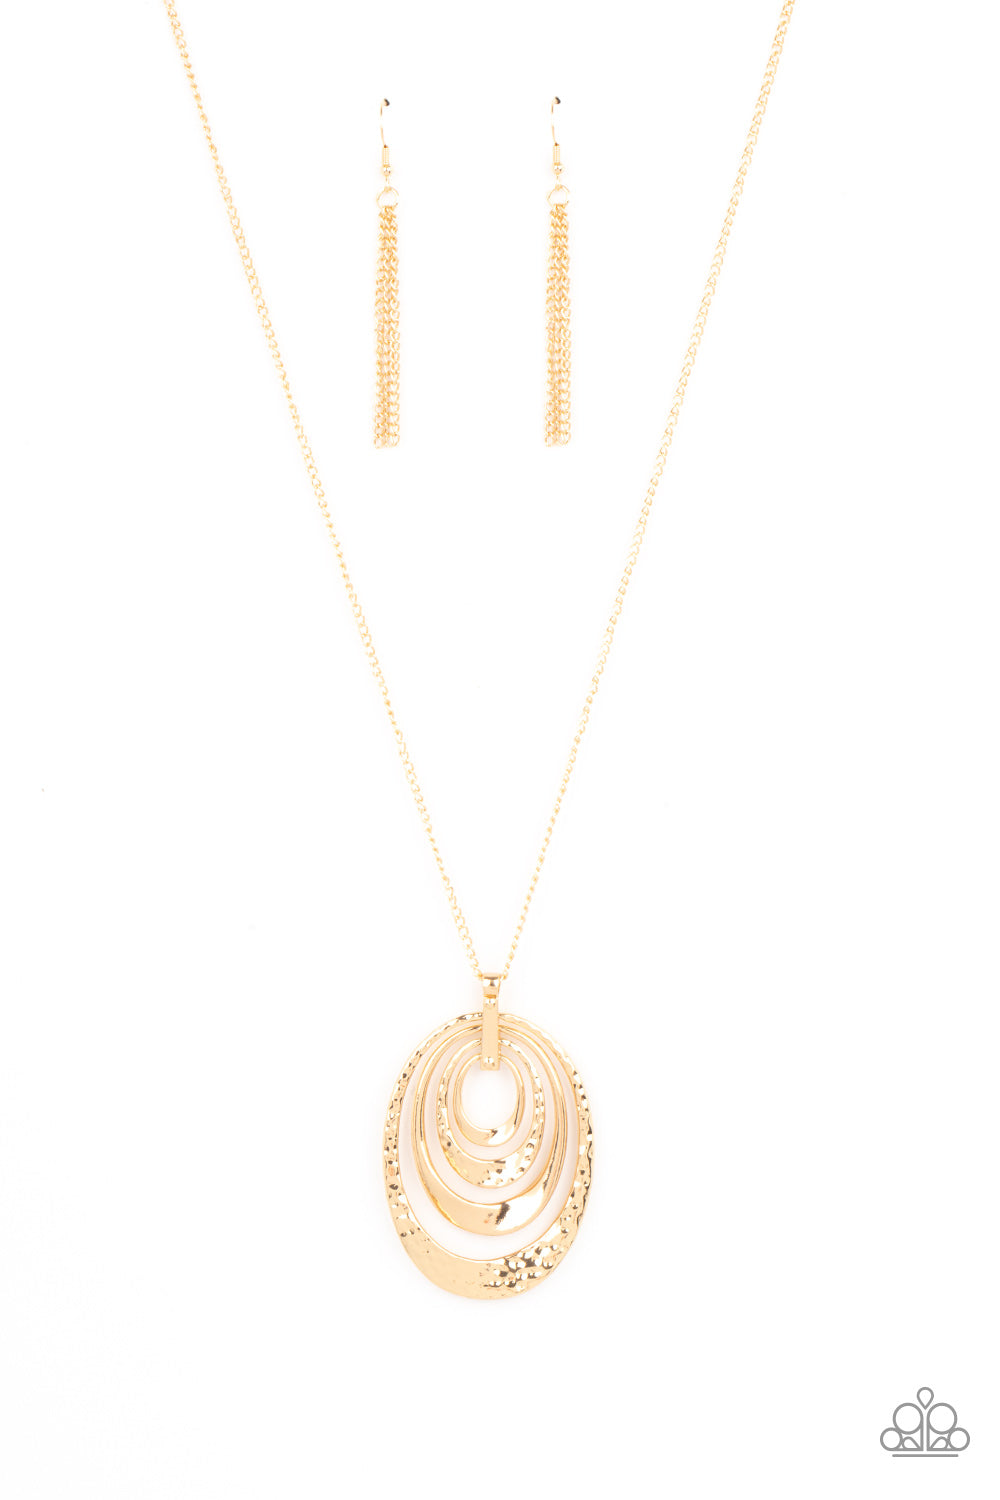 Paparazzi - Renegade Ripple - Gold Necklace